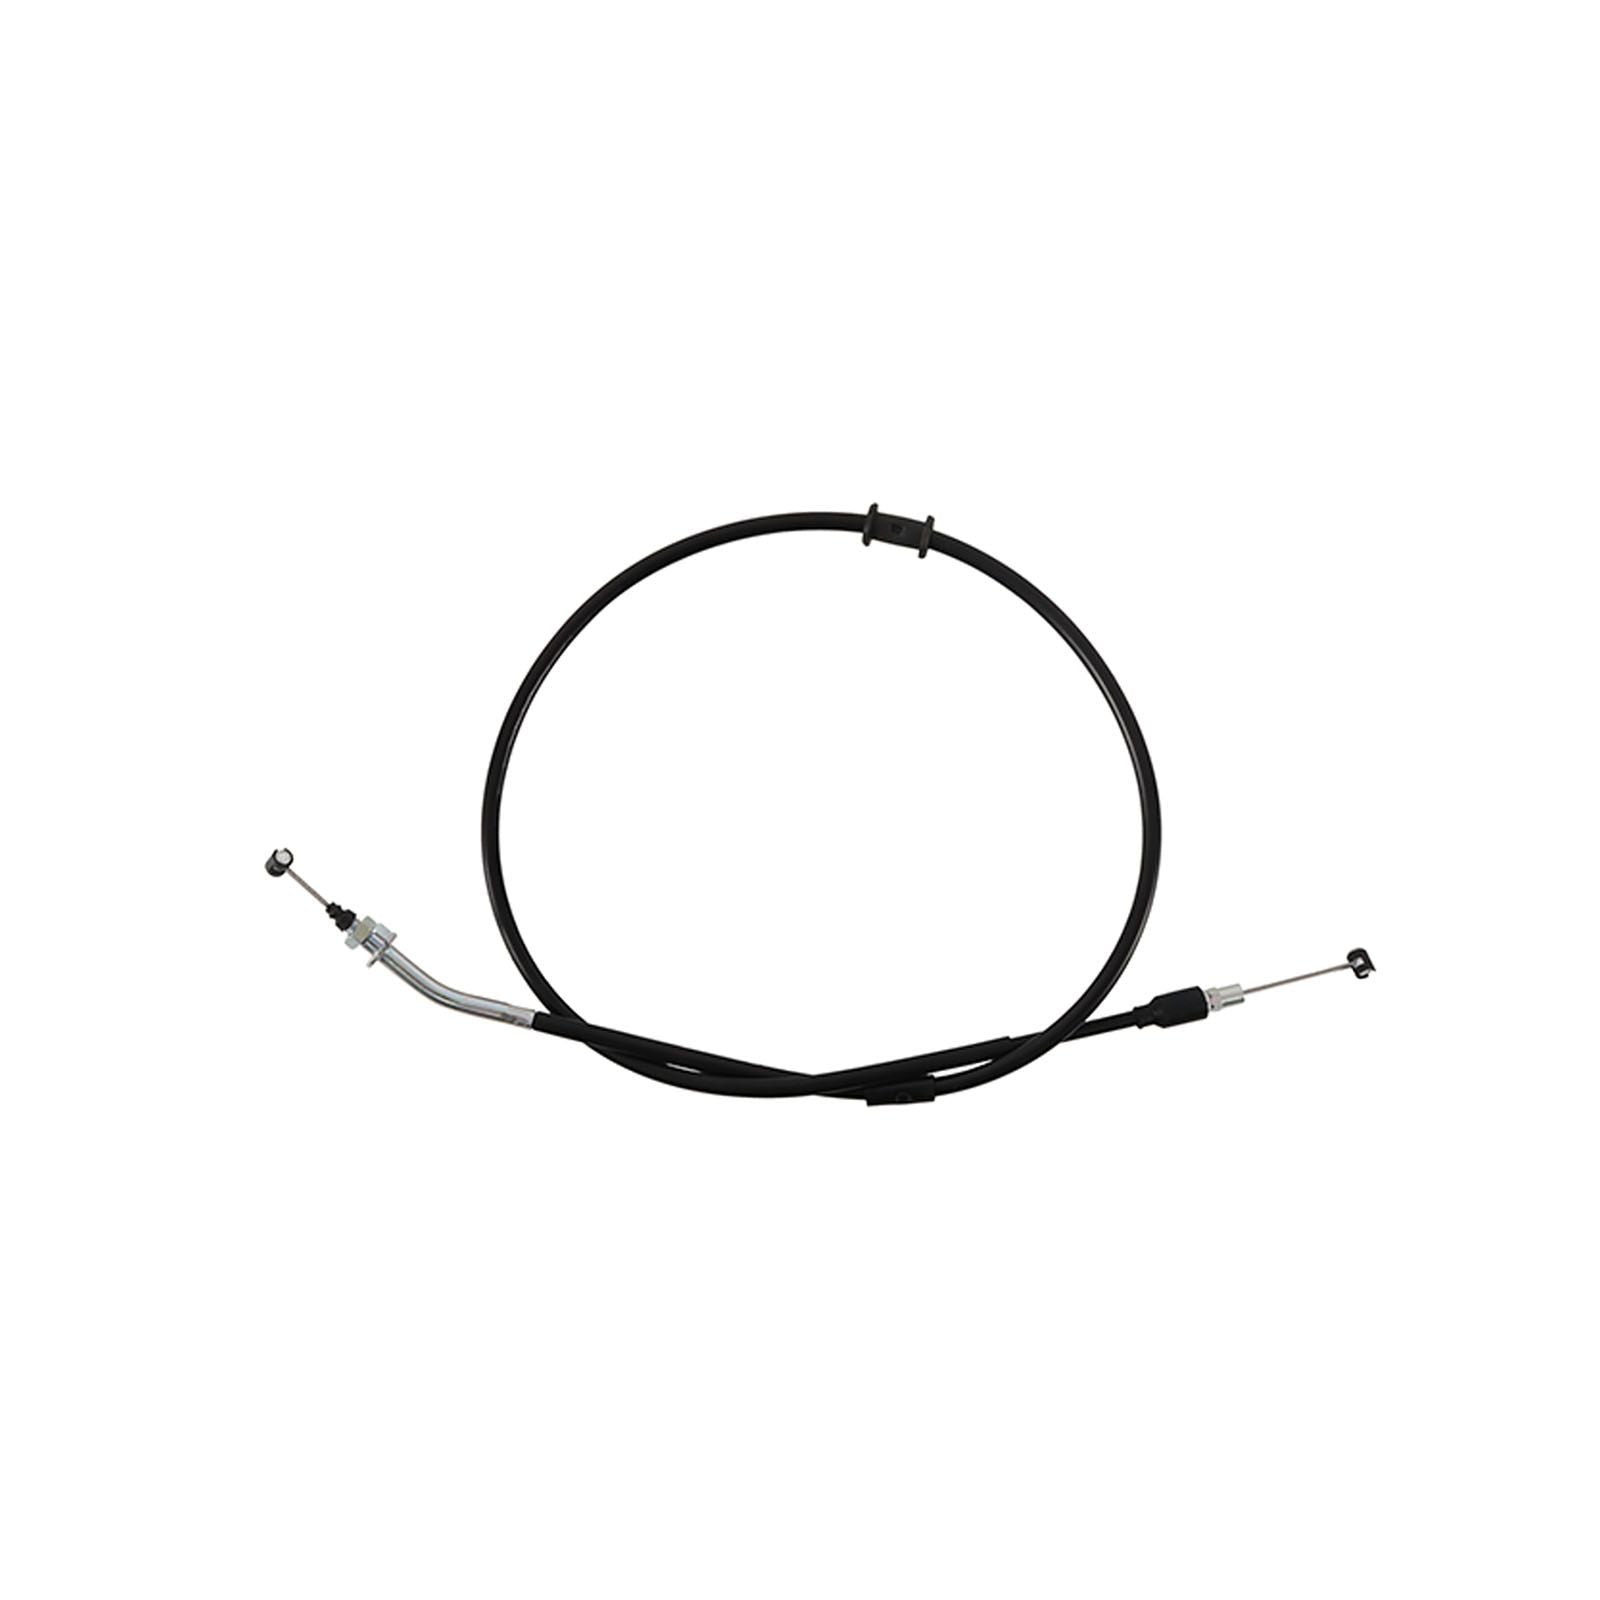 New ALL BALLS Racing Clutch Cable #AB452144